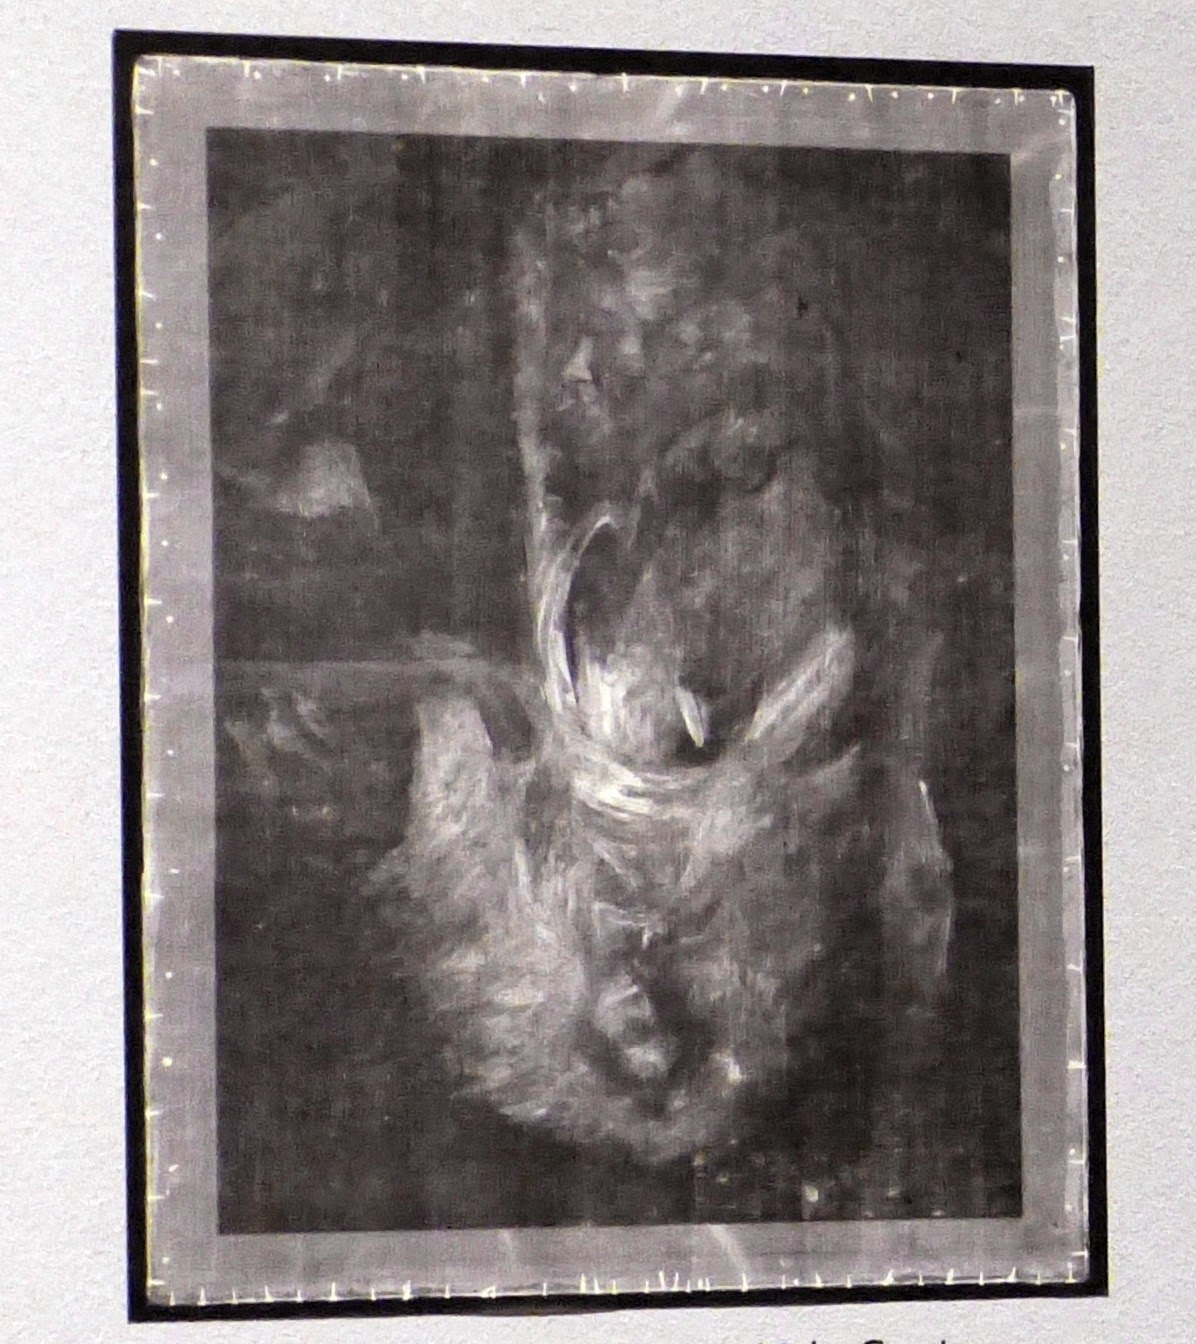 X-ray image of the Yale Center's portrait of Mary   Robinson shown below.